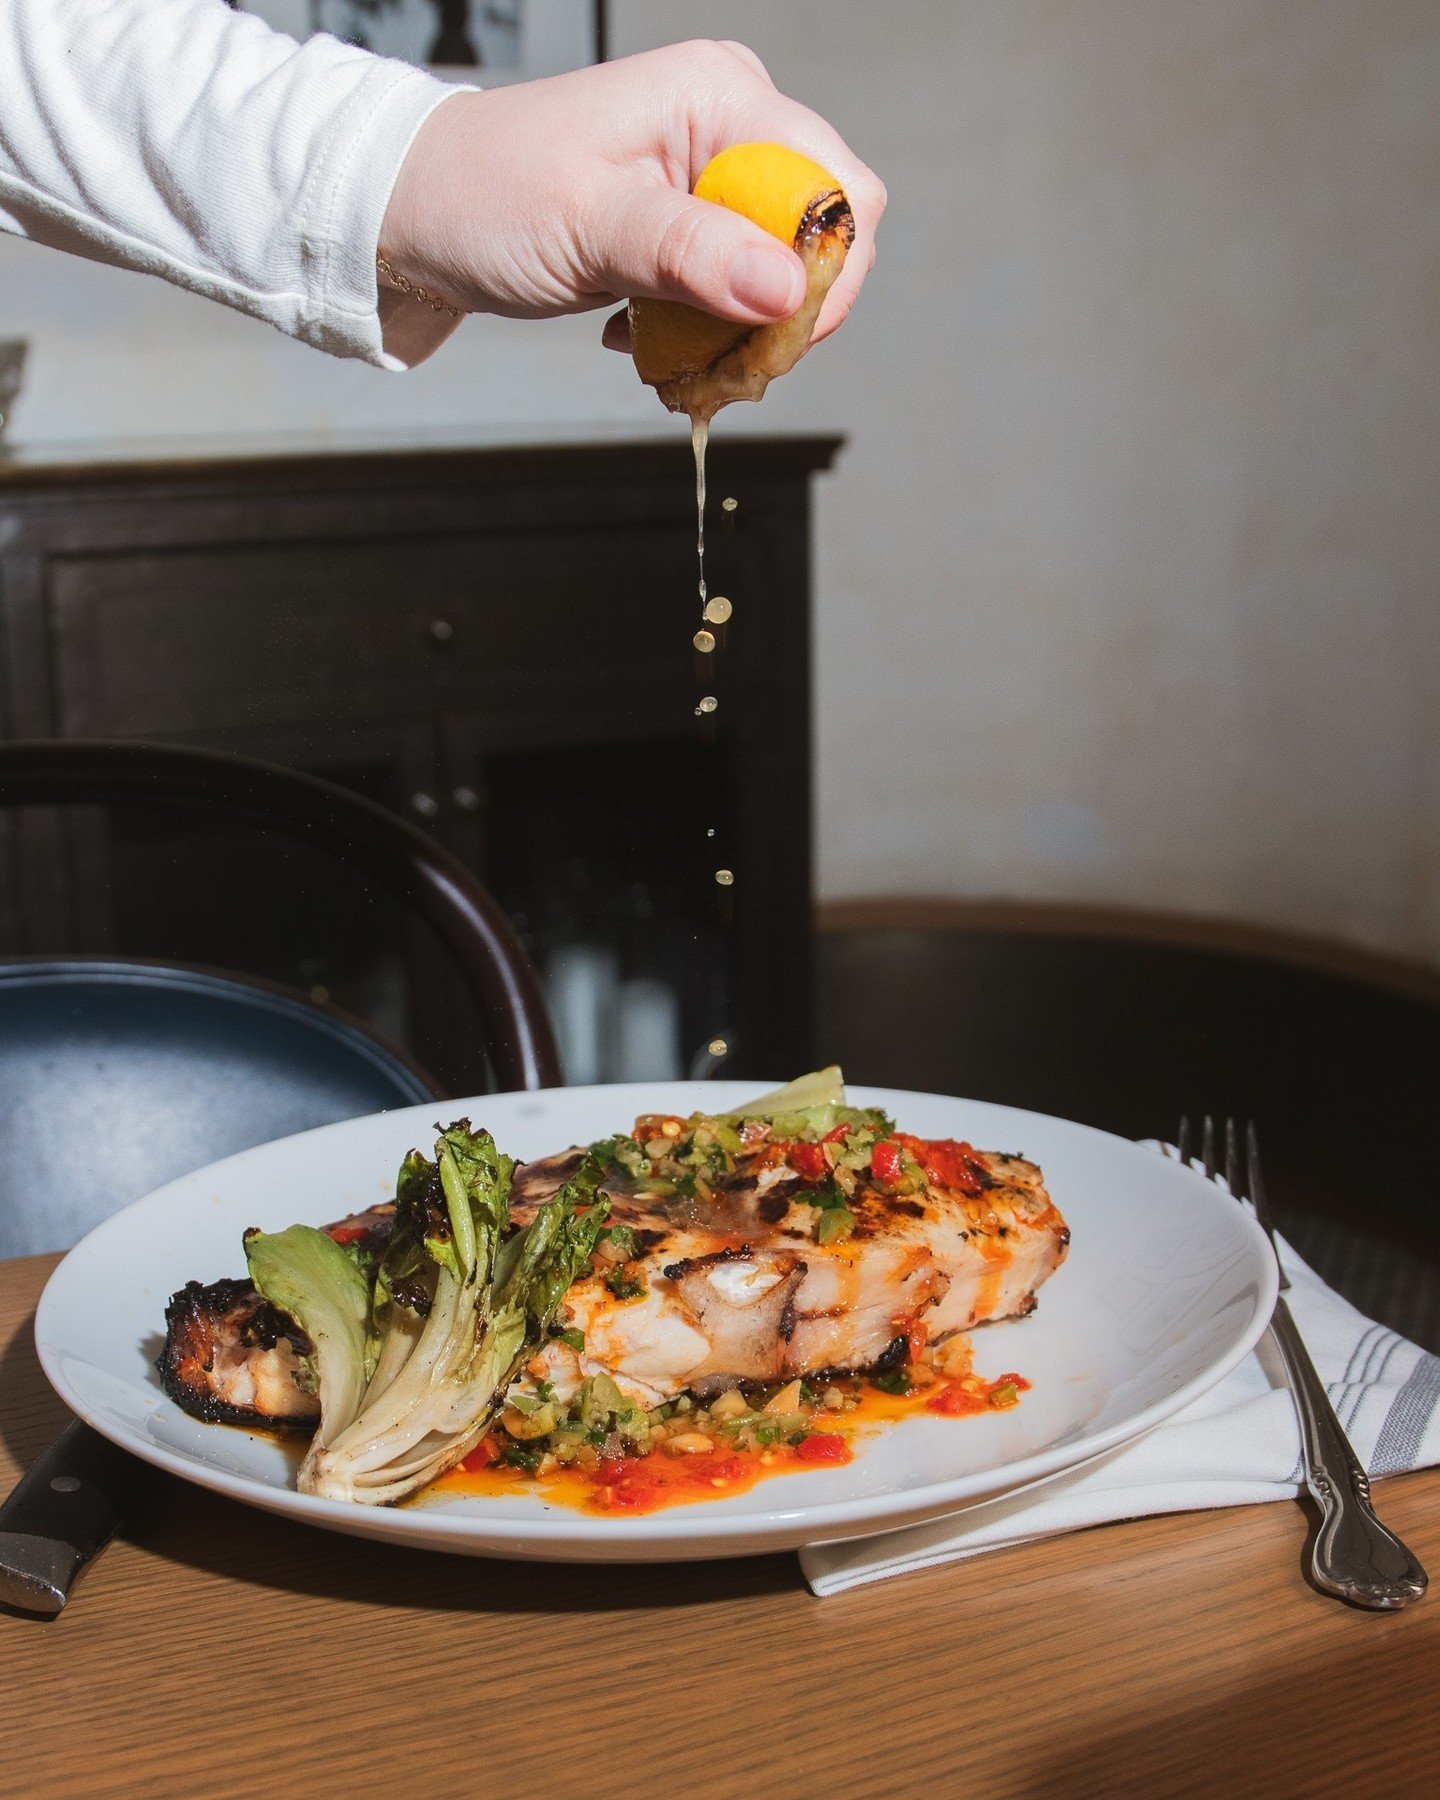 ⁠Think dinner at Giuseppe &amp; Sons couldn't get any better?...Think again! Our menu specials add that extra flavor you didn't know you needed 🍋🍝⁠
⁠
Wondering what's cooking tonight? Just ask your server - Trust us, you won't want to miss this!⁠
⁠